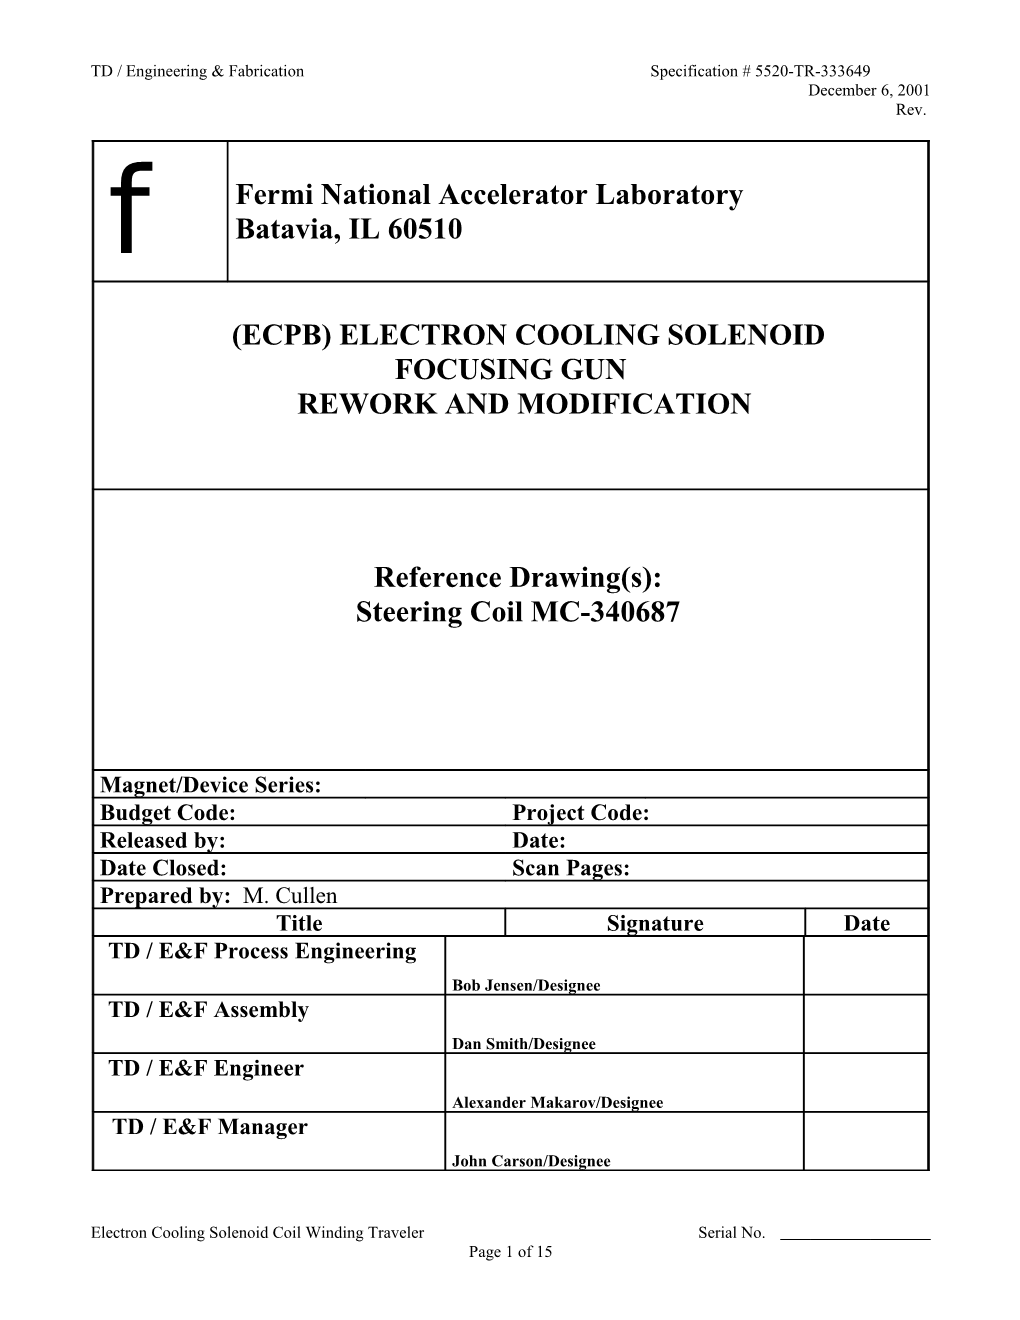 (Ecpb) Electron Cooling Solenoid